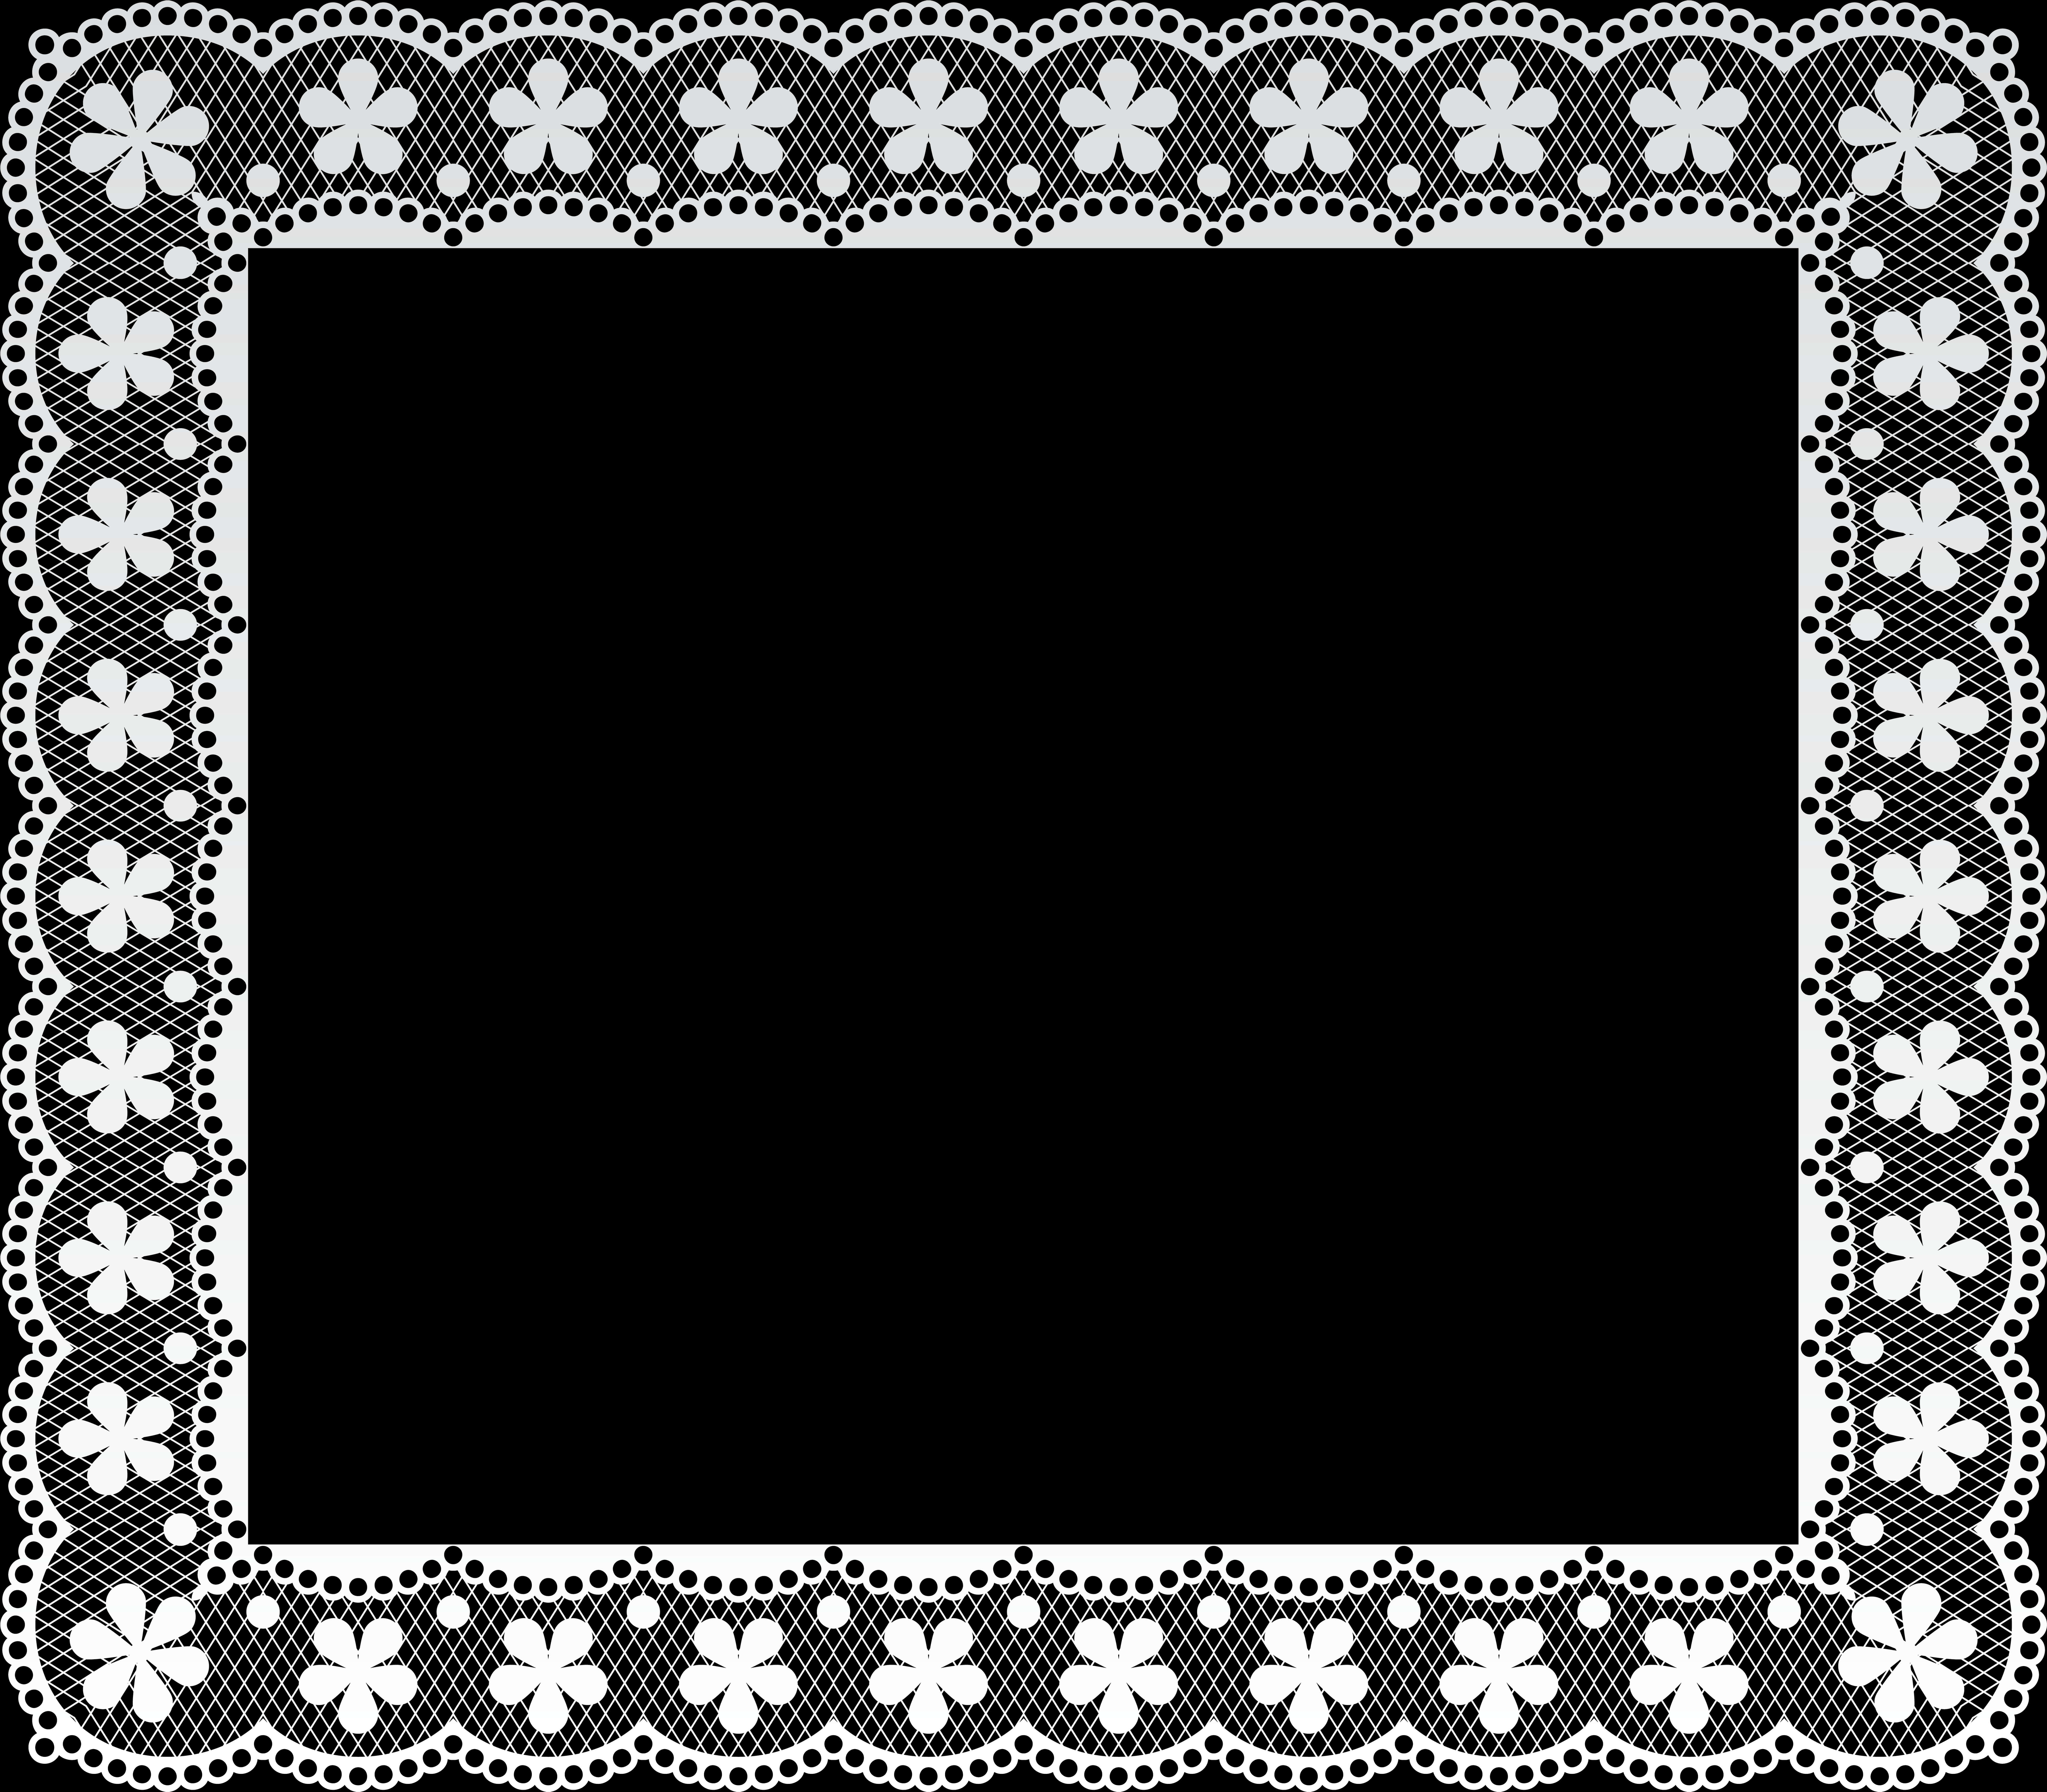 A White Lace Border On A Black Background